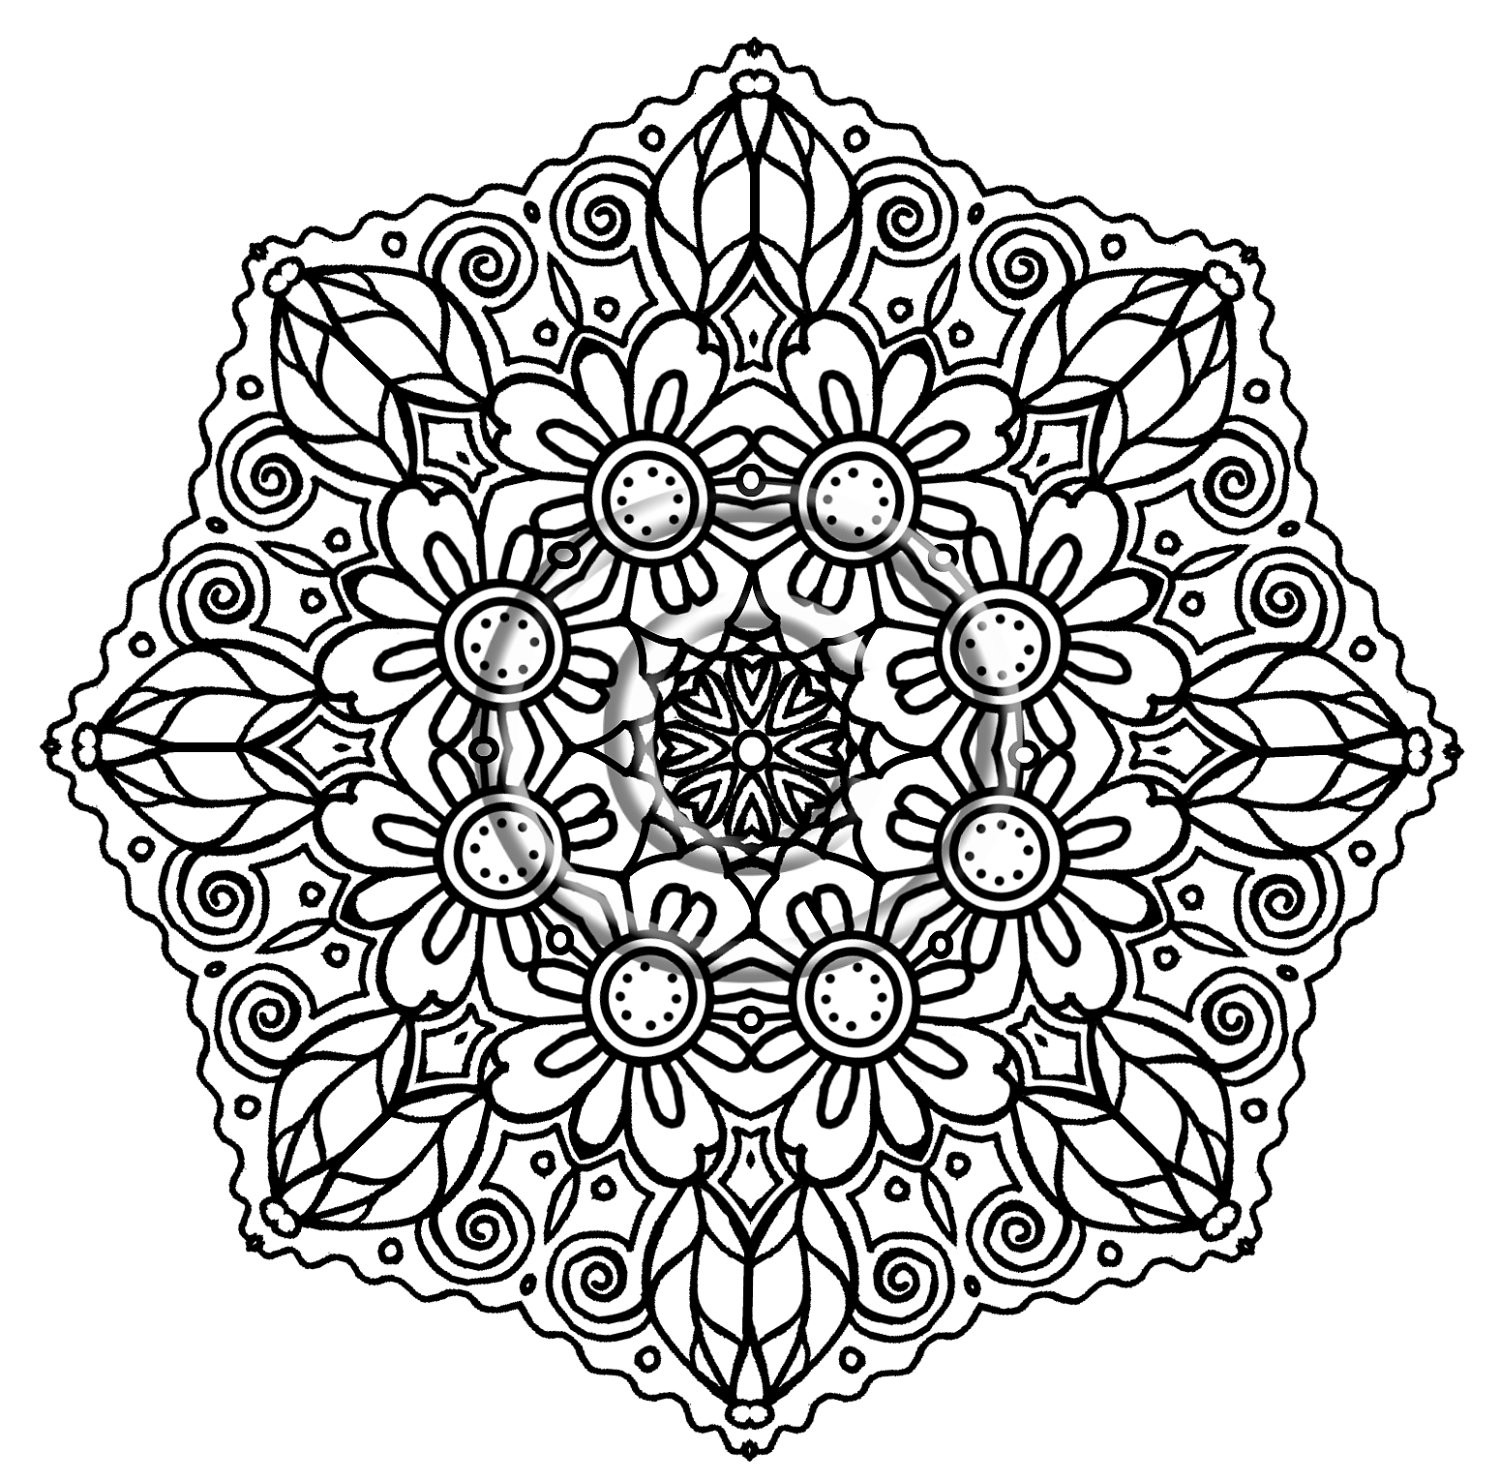 Coloring Pages For Adults Mandala
 Adult Mandala Coloring Pages Bestofcoloring